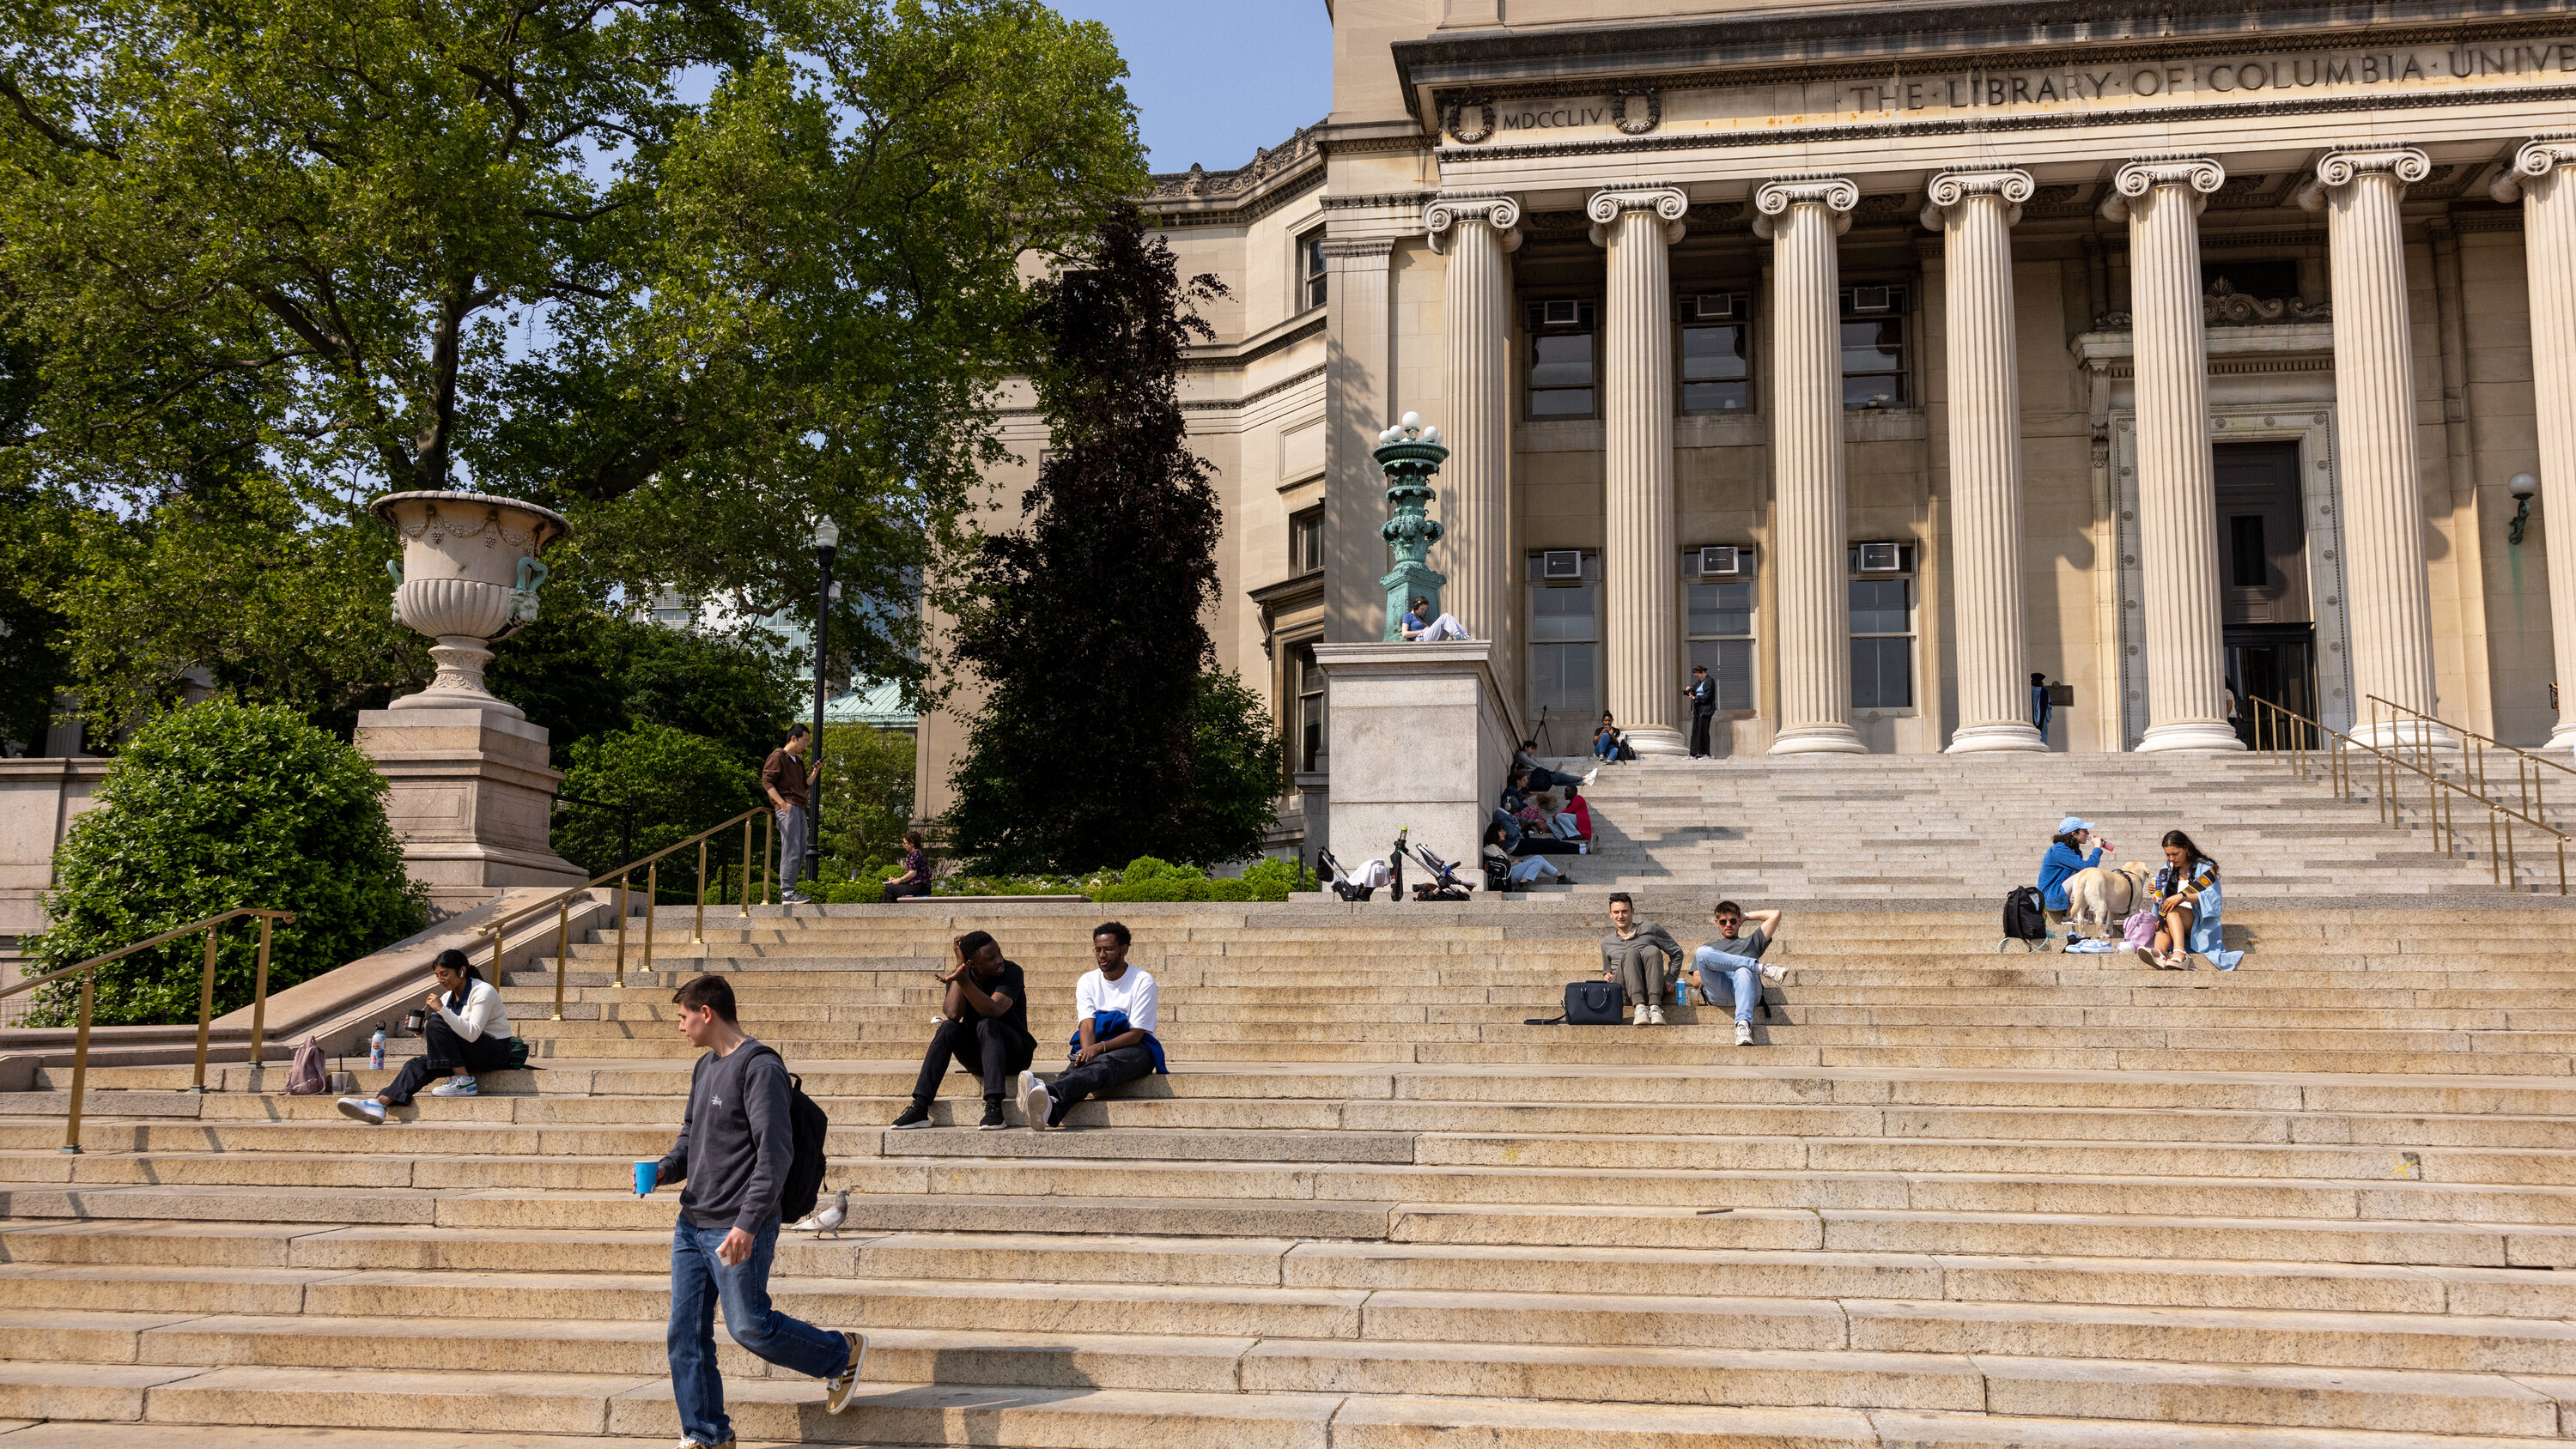 Visitors relax on the grand steps outside the iconic library of Columbia University on a sunny day.